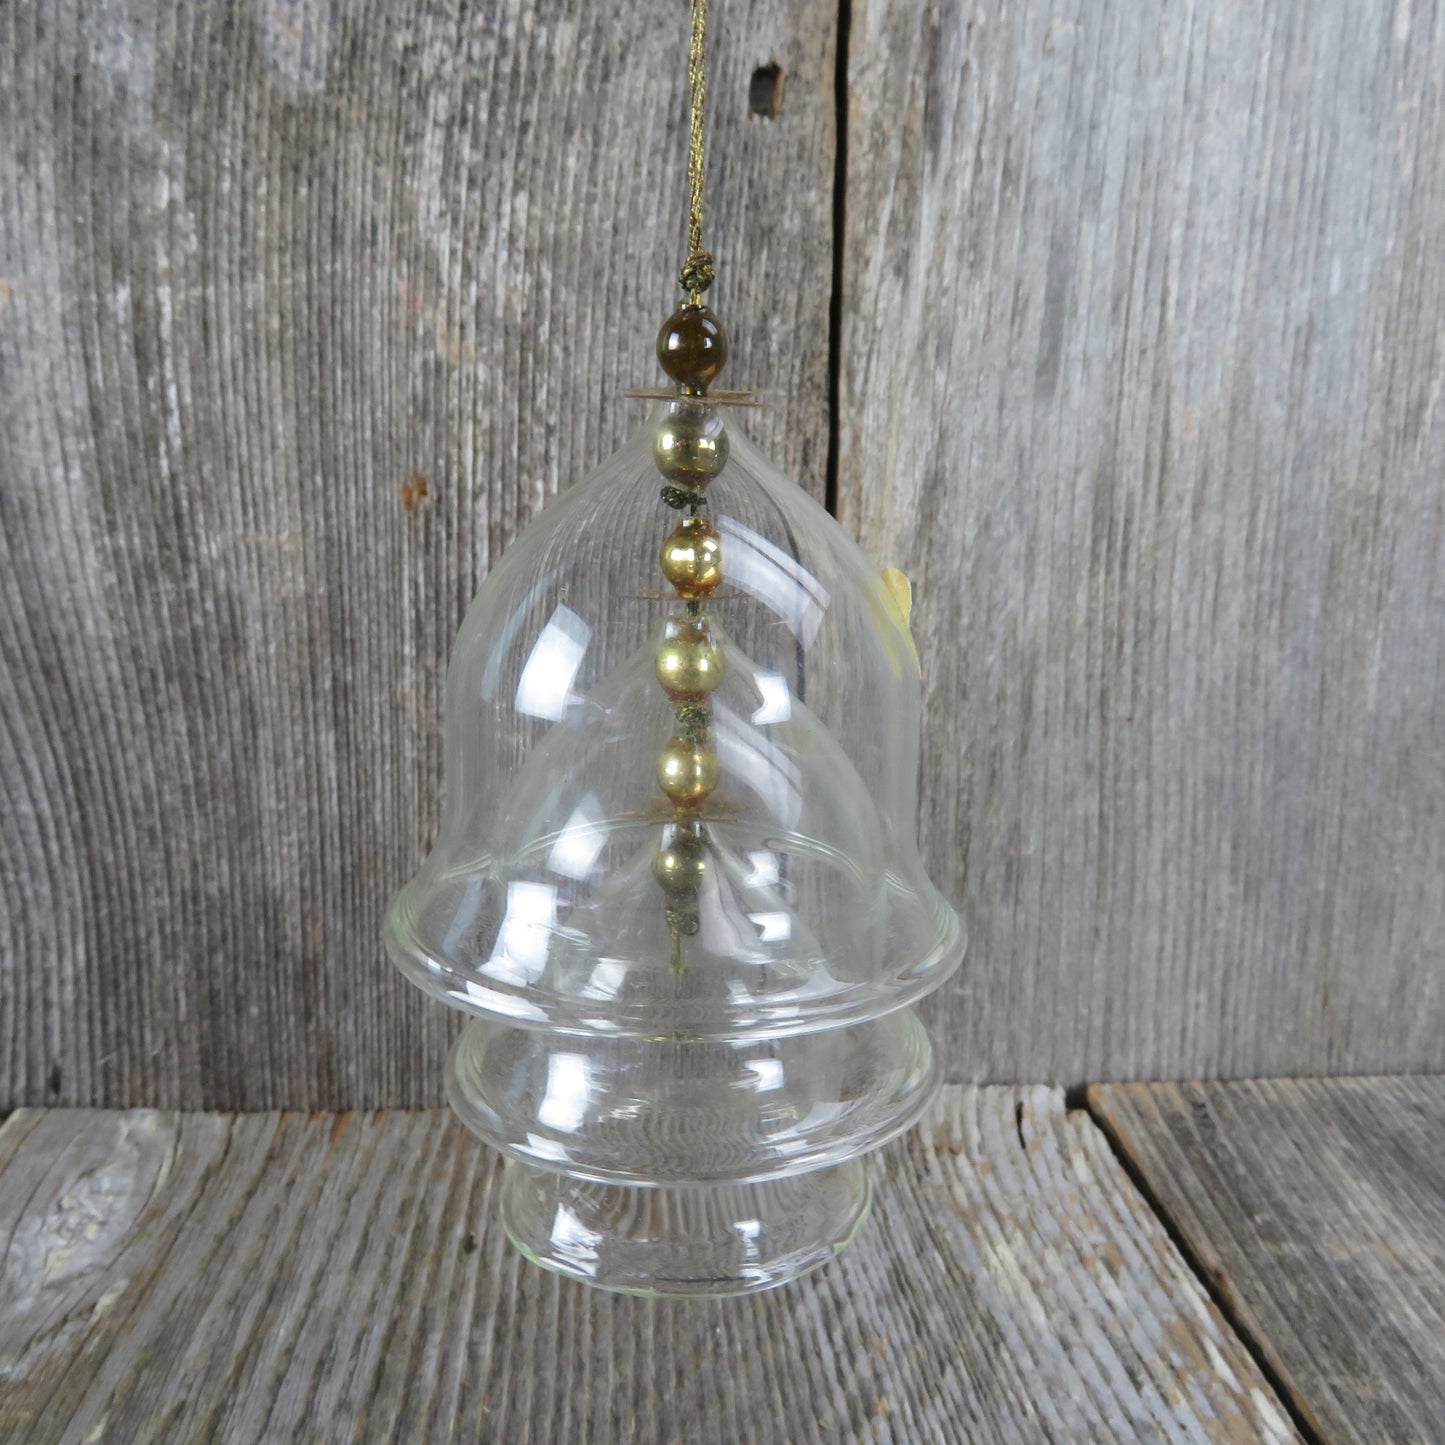 Vintage Glass Bell Ornament Graduated 3 Tier Germany Gold Christmas Ornament Tiered Bell - At Grandma's Table